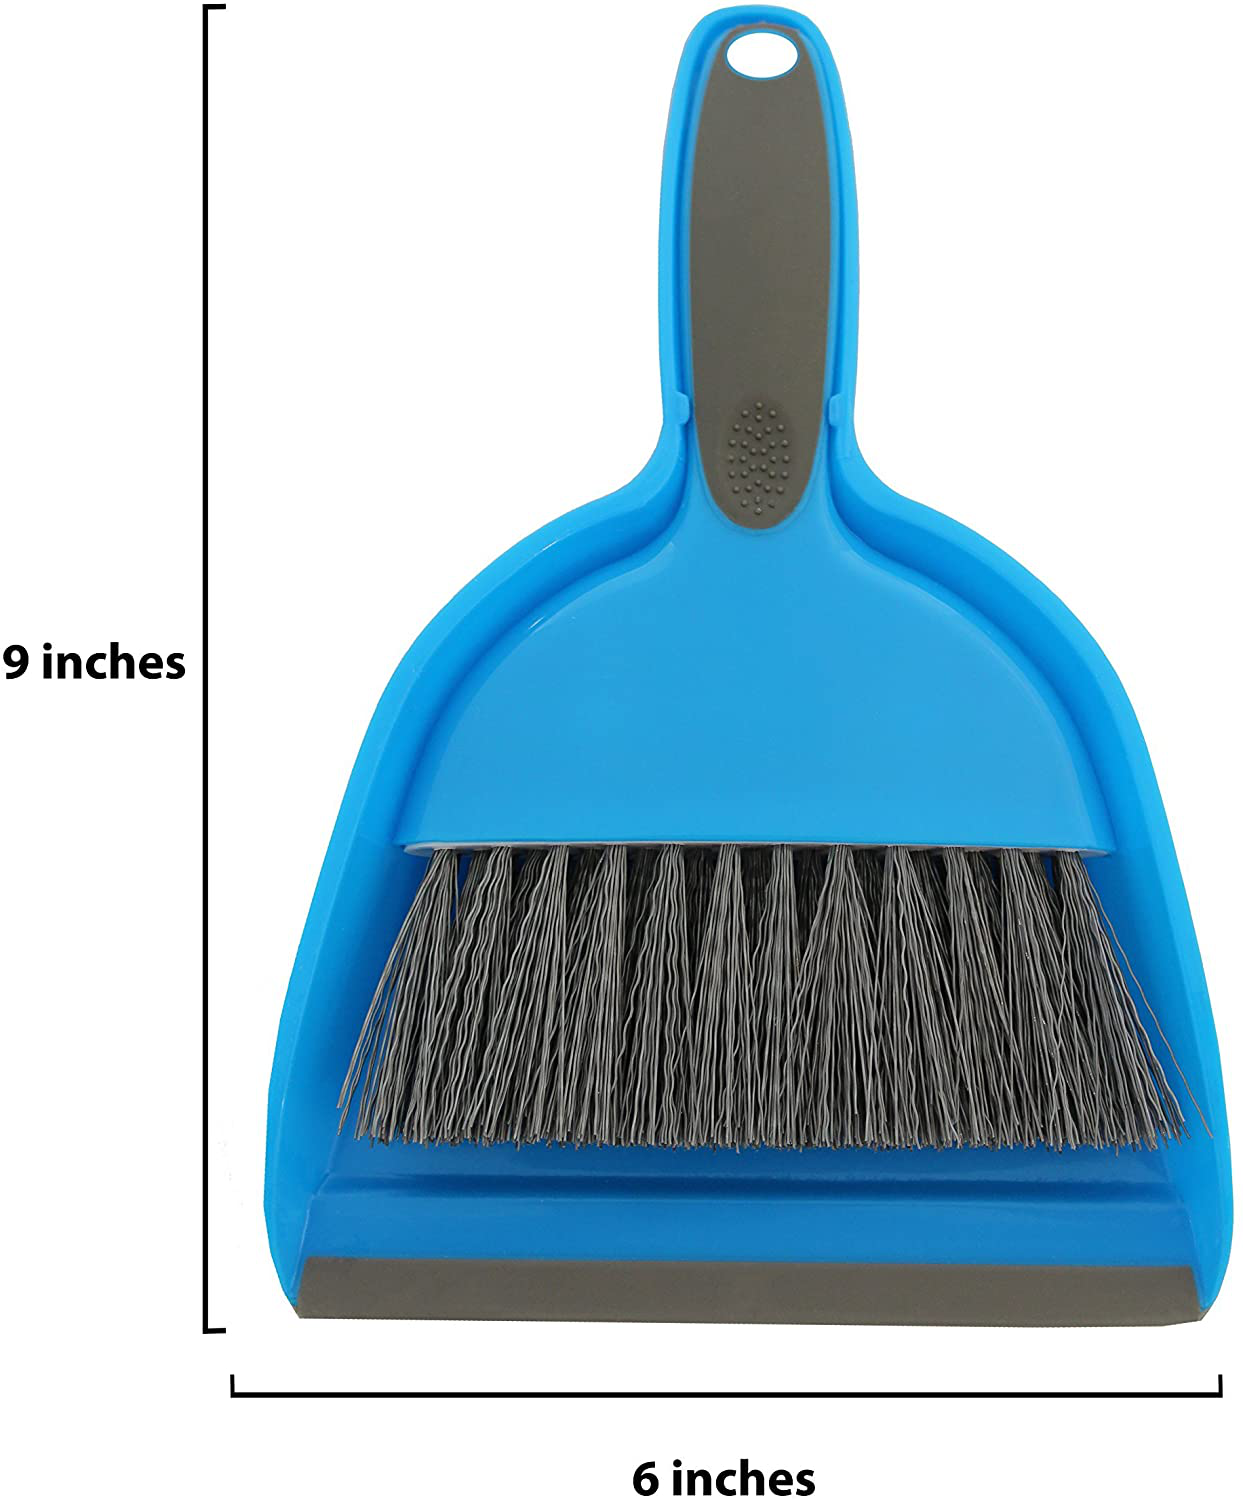 Cage Cleaner for Guinea Pigs, Cats, Hedgehogs, Hamsters, Chinchillas, Rabbits, Reptiles, and Other Small Animals - Cleaning Tool Set for Animal Waste - Mini Dustpan and Brush Set (1 Pack)